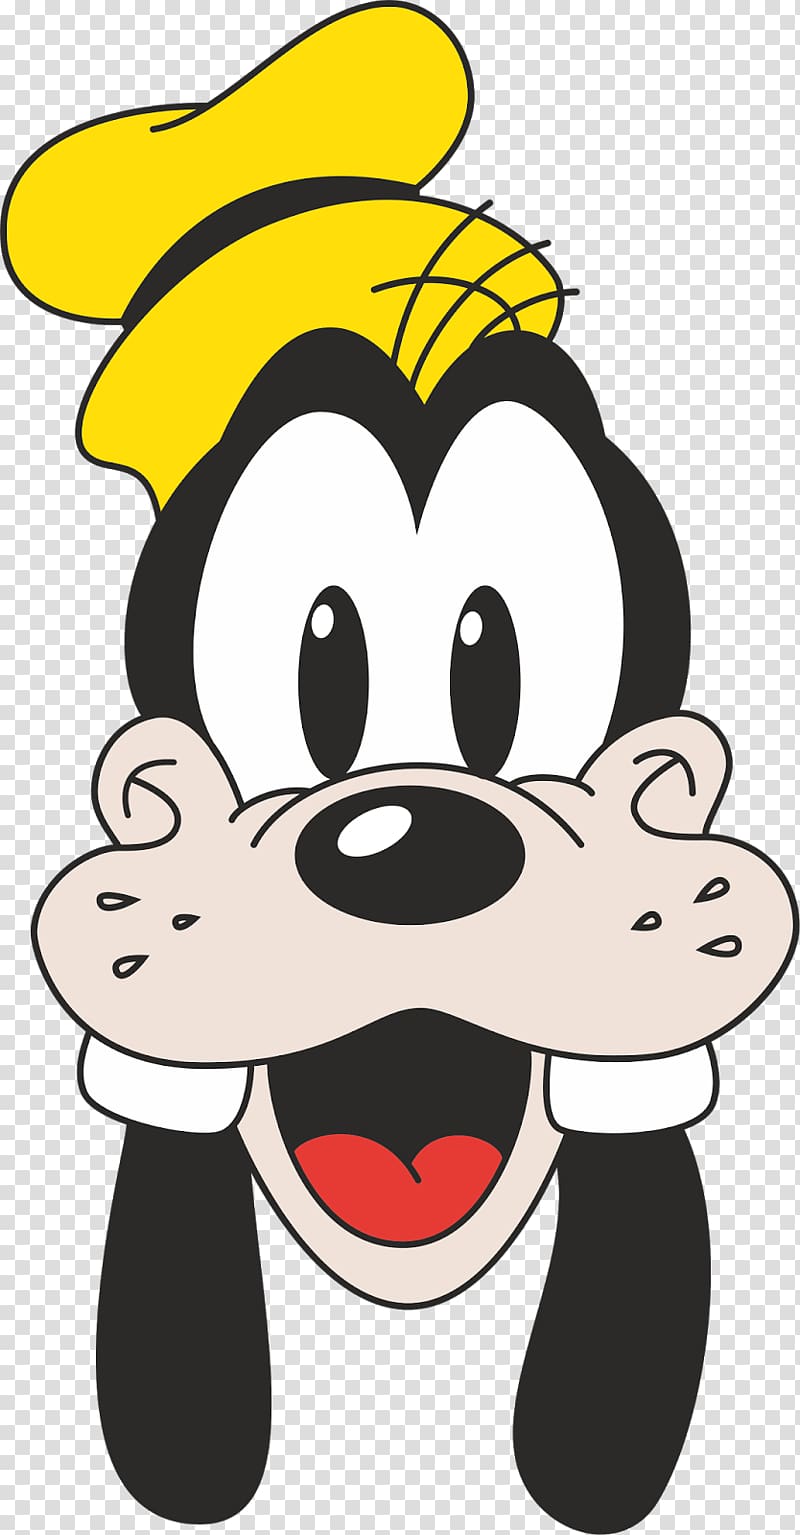 Goofy Minnie Mouse Mickey Mouse Donald Duck Pluto, cdr transparent background PNG clipart